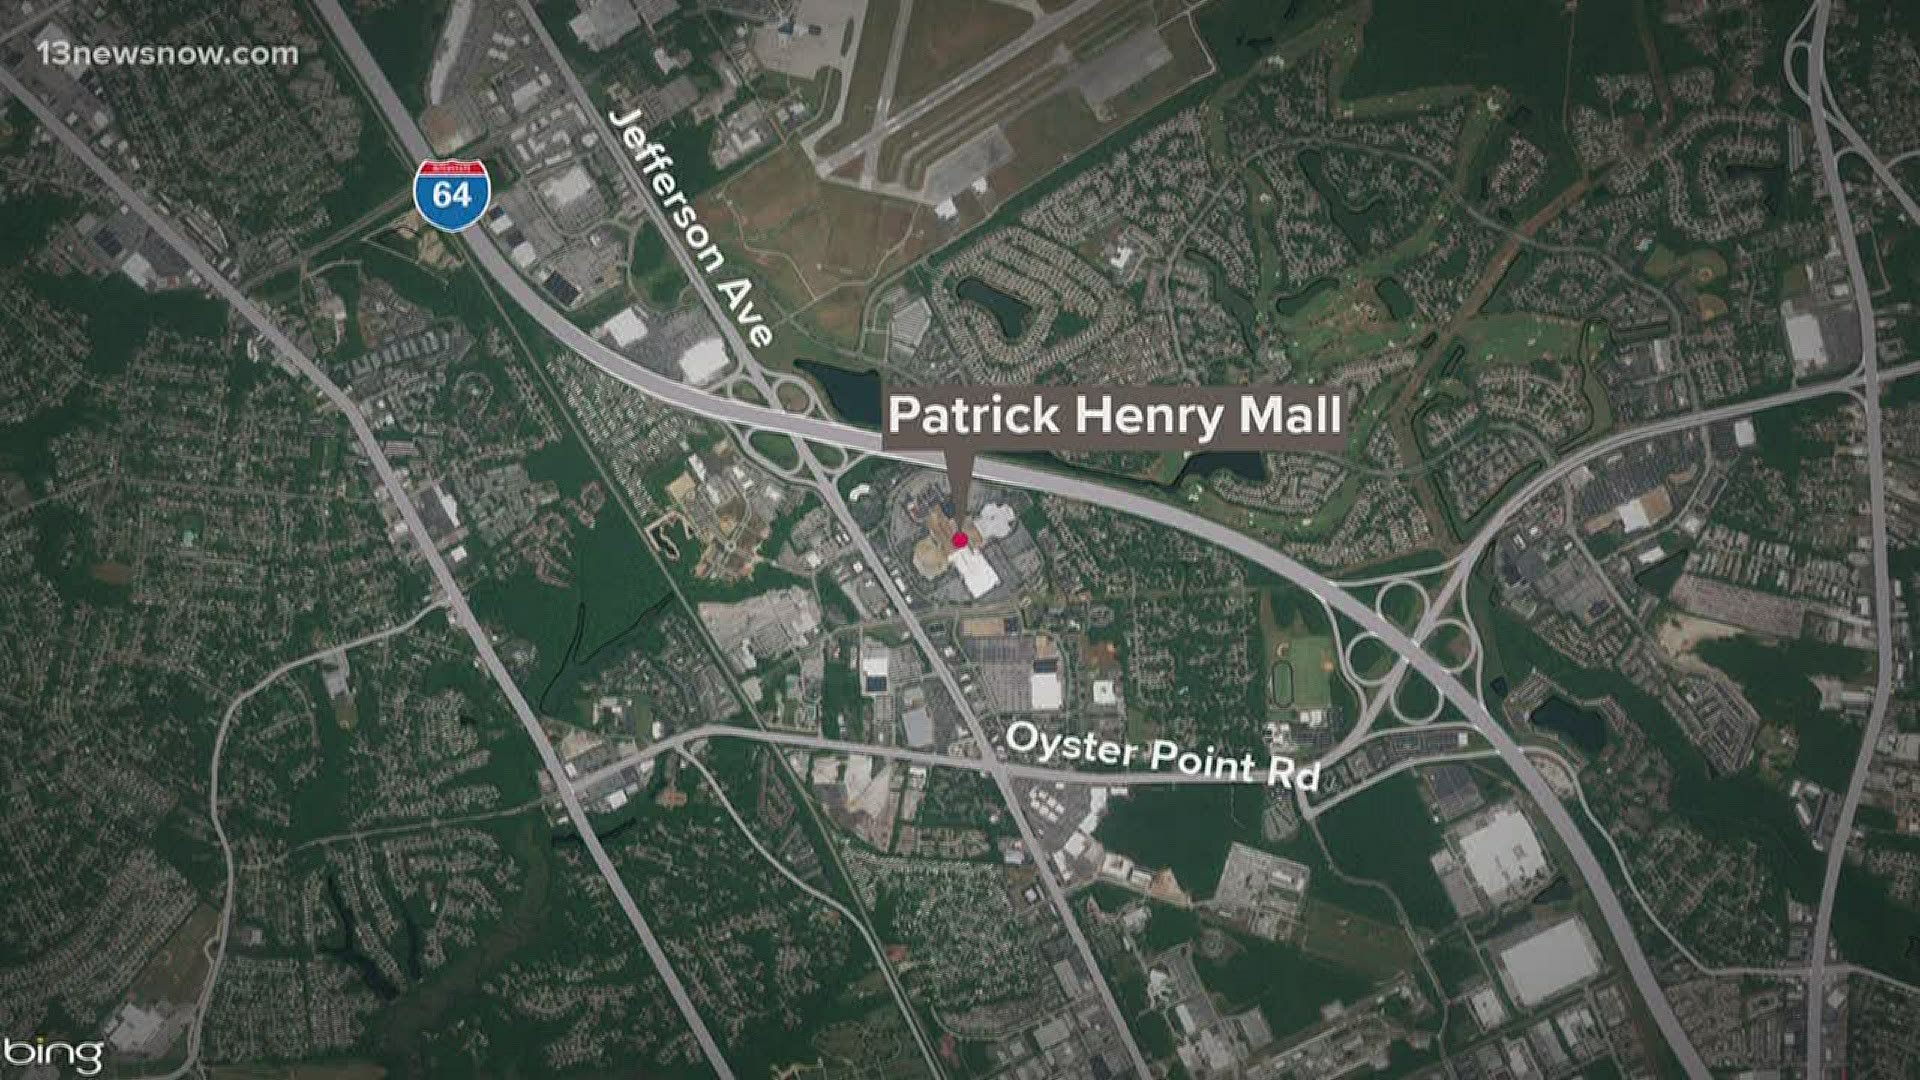 One person was found shot in the mall's parking lot Friday afternoon. The mall stayed open after the victim was found and taken to a hospital.